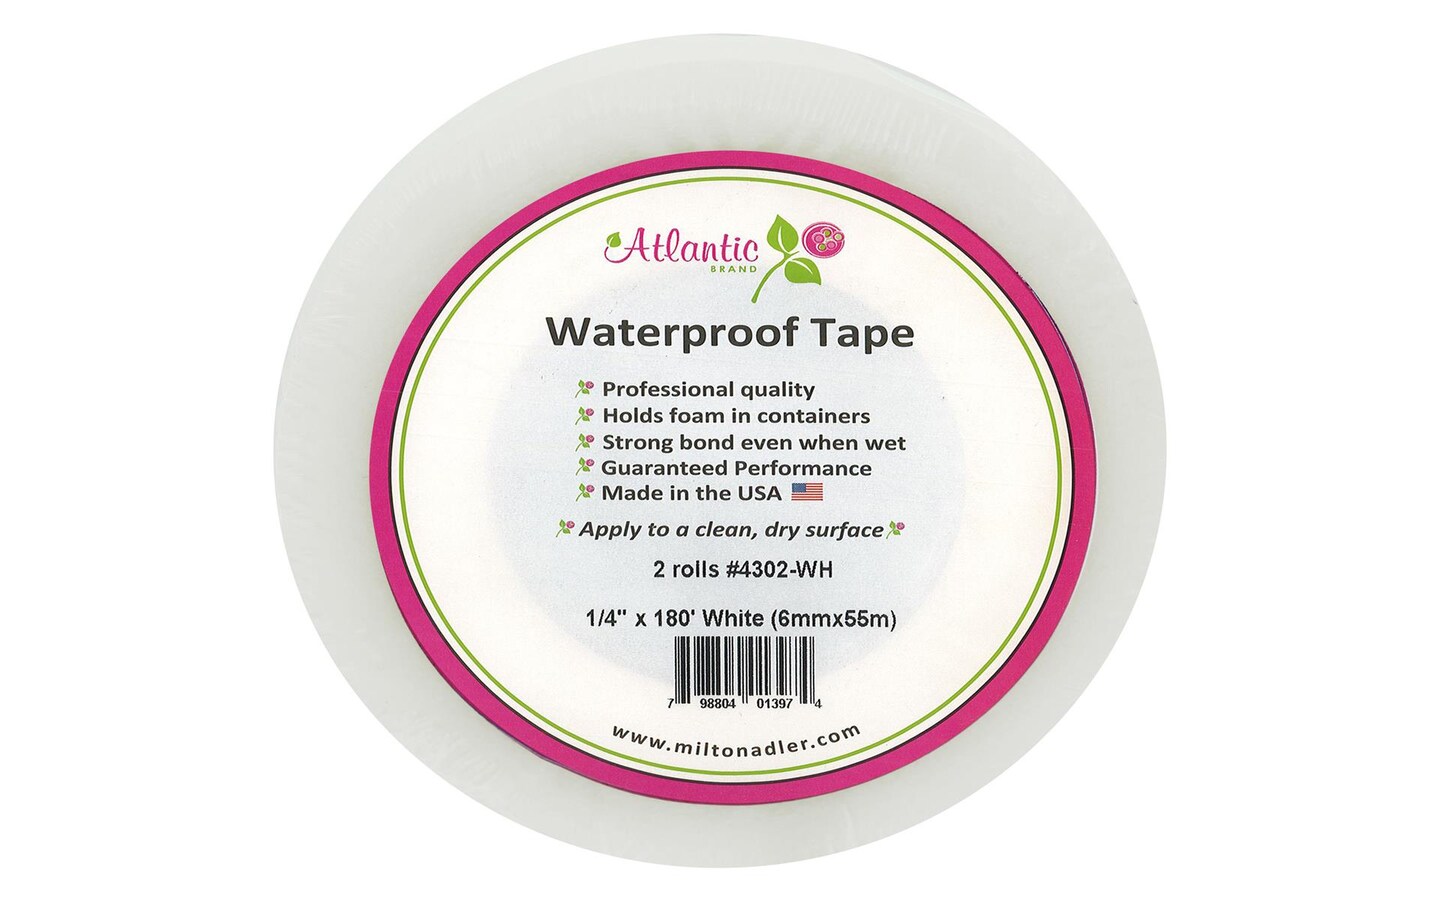 12 Packs: 3 Ct. (36 Total) Green Floral Tape Value Pack by Ashland